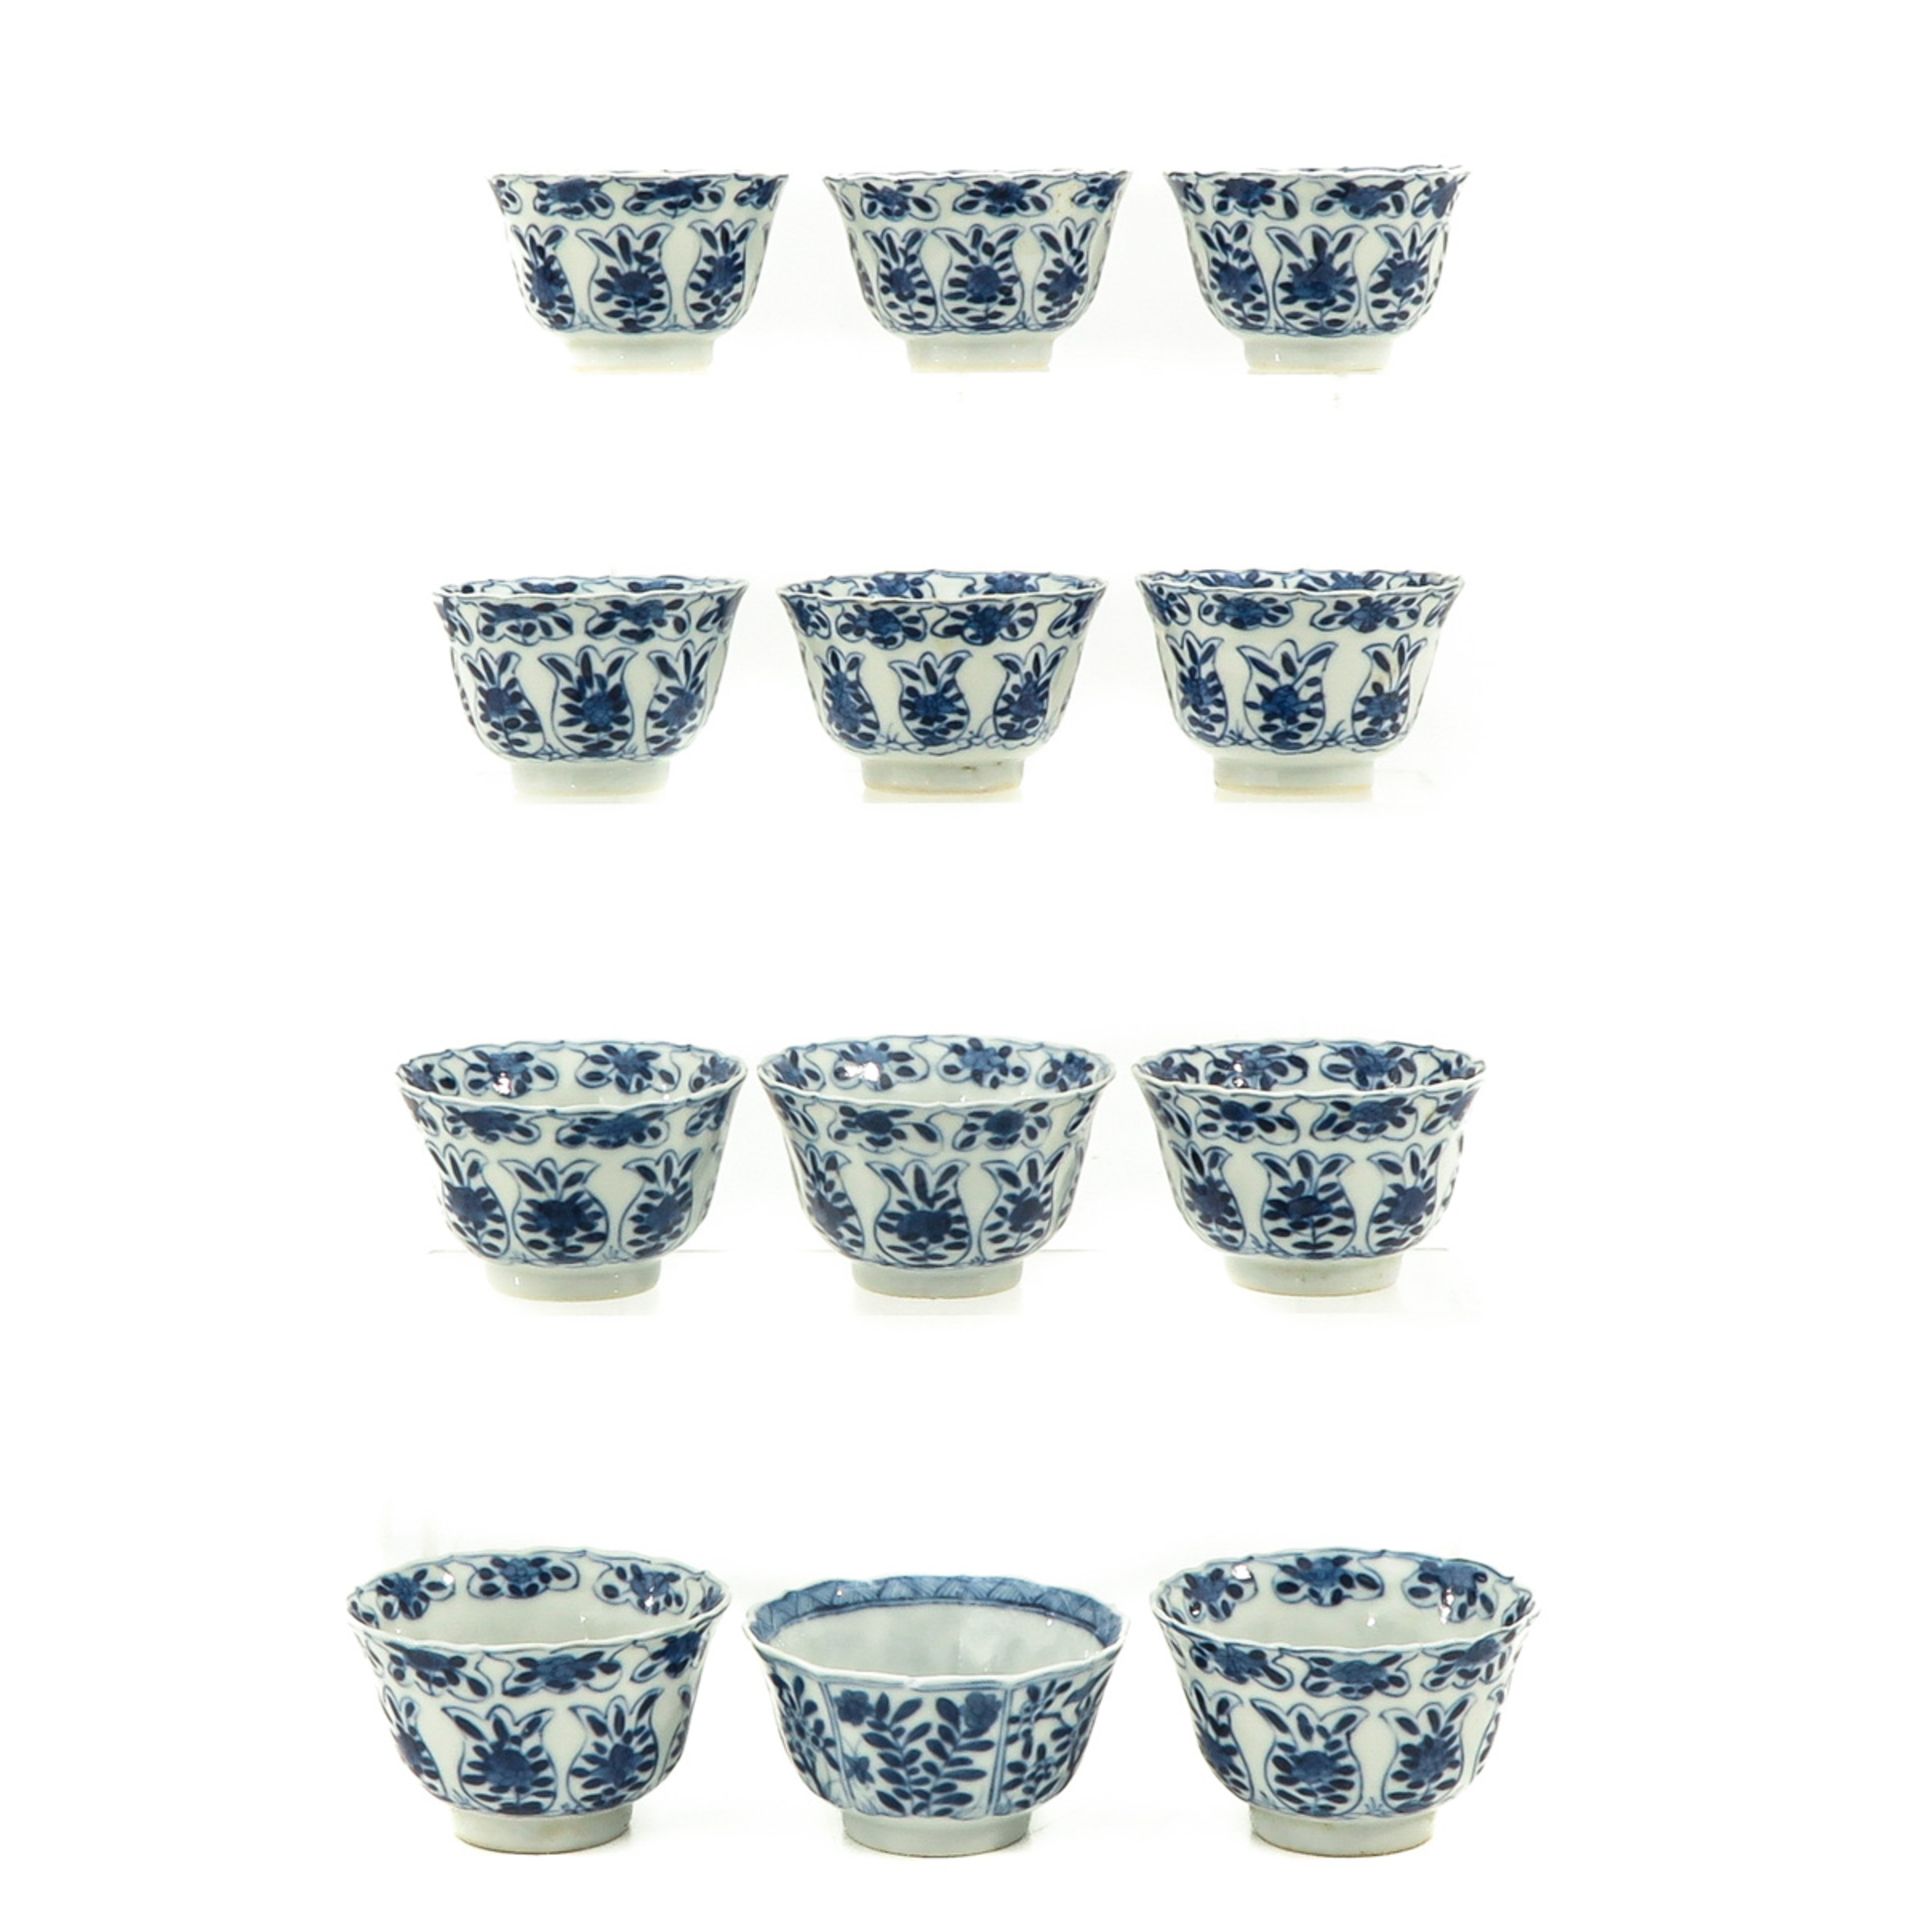 A Series of 12 Cups and Saucers - Bild 3 aus 10